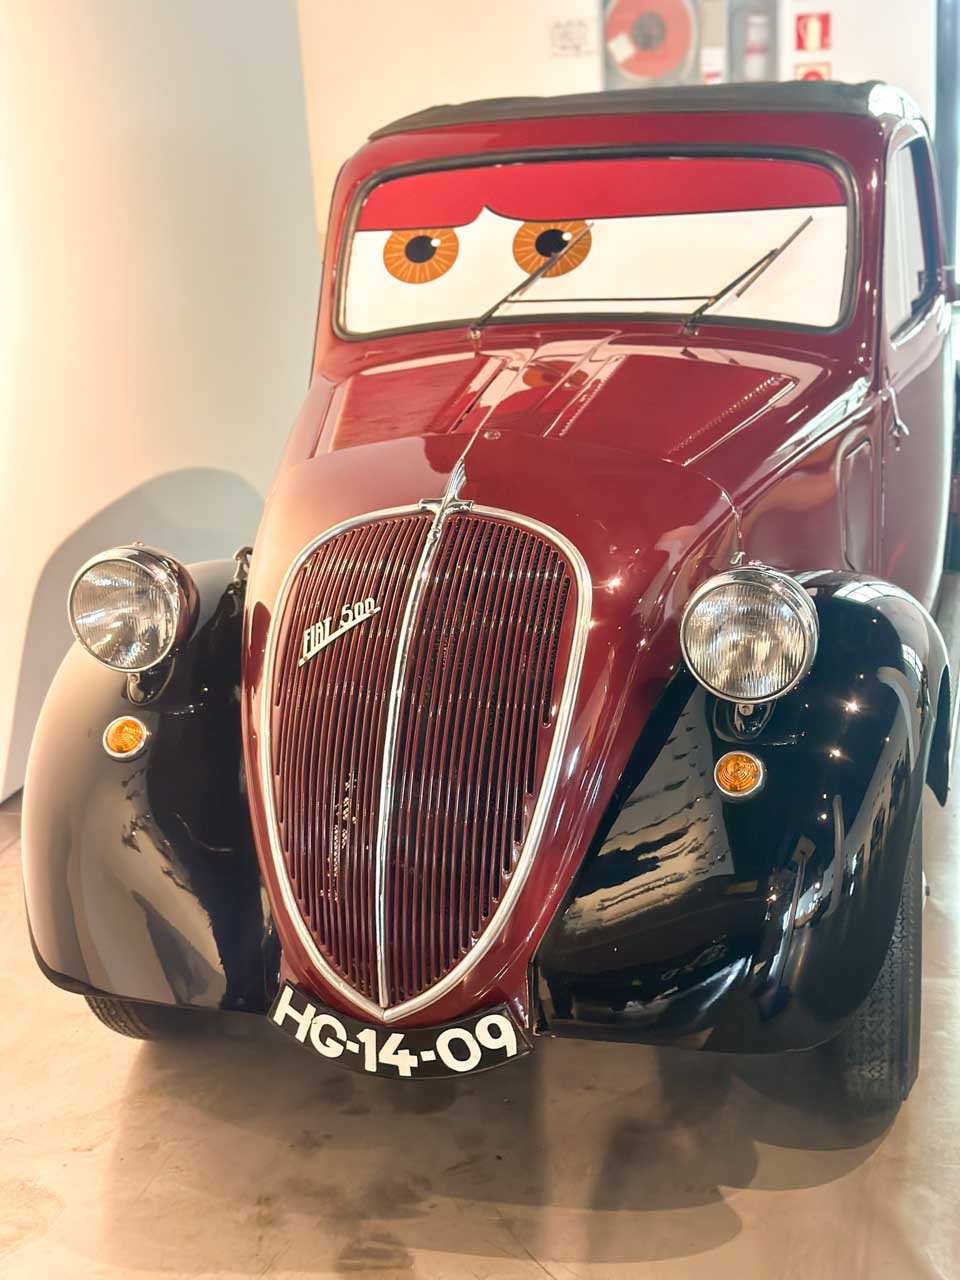 A vintage car in burgundy with large eyes on the windscreen at the Automobile and Fashion Museum in Malaga, Spain